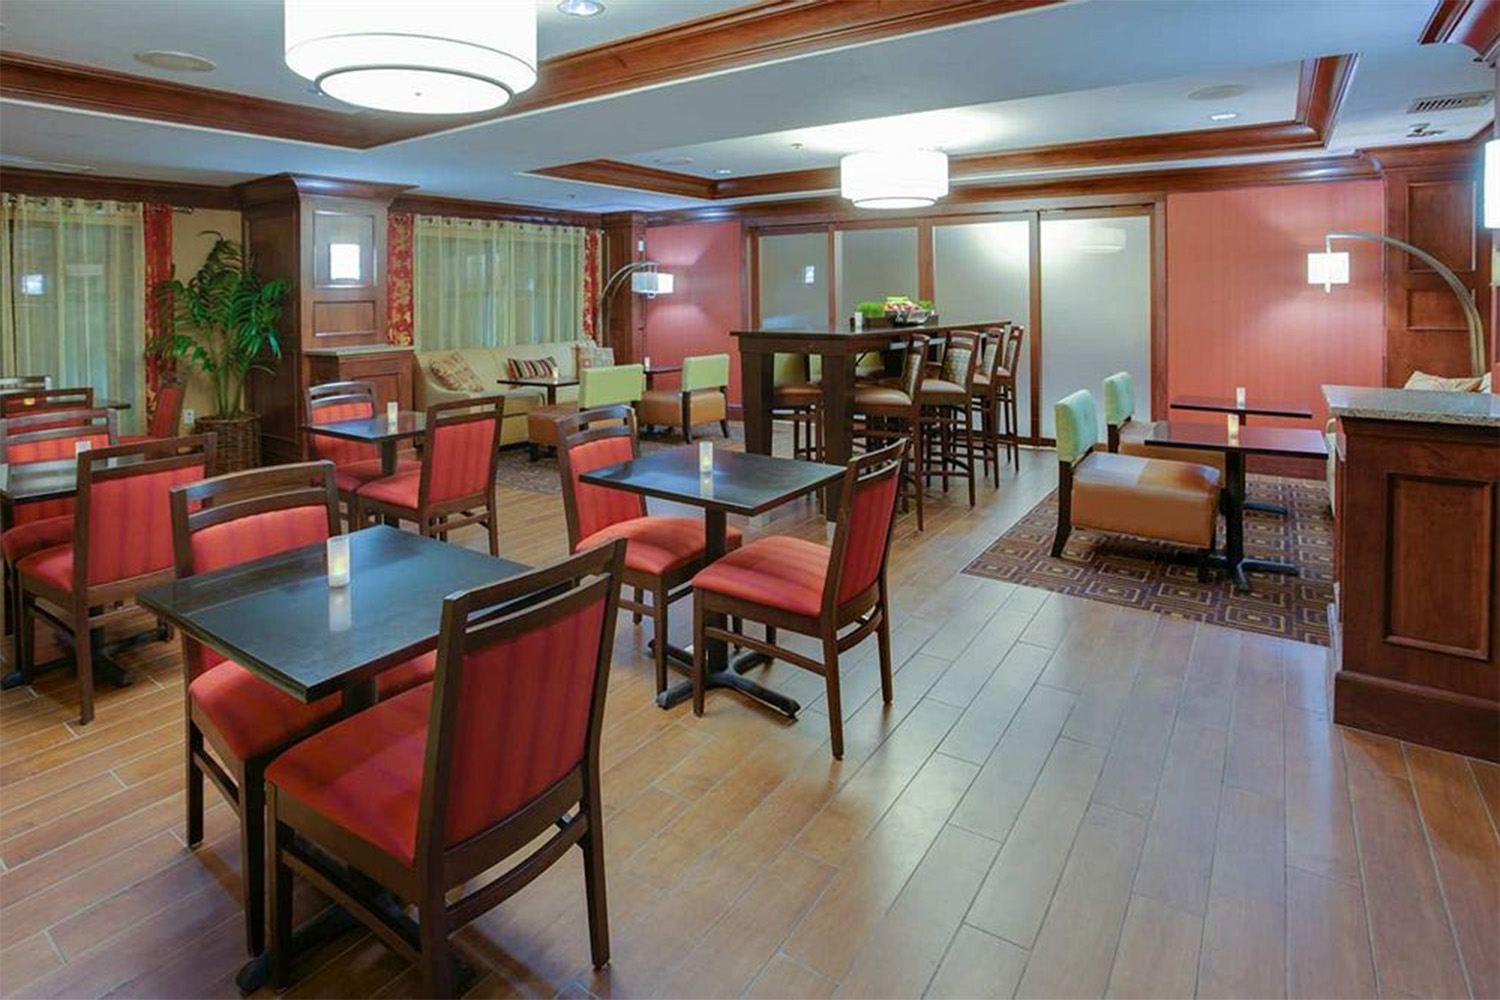 Café area with red seats and dark wood floor 